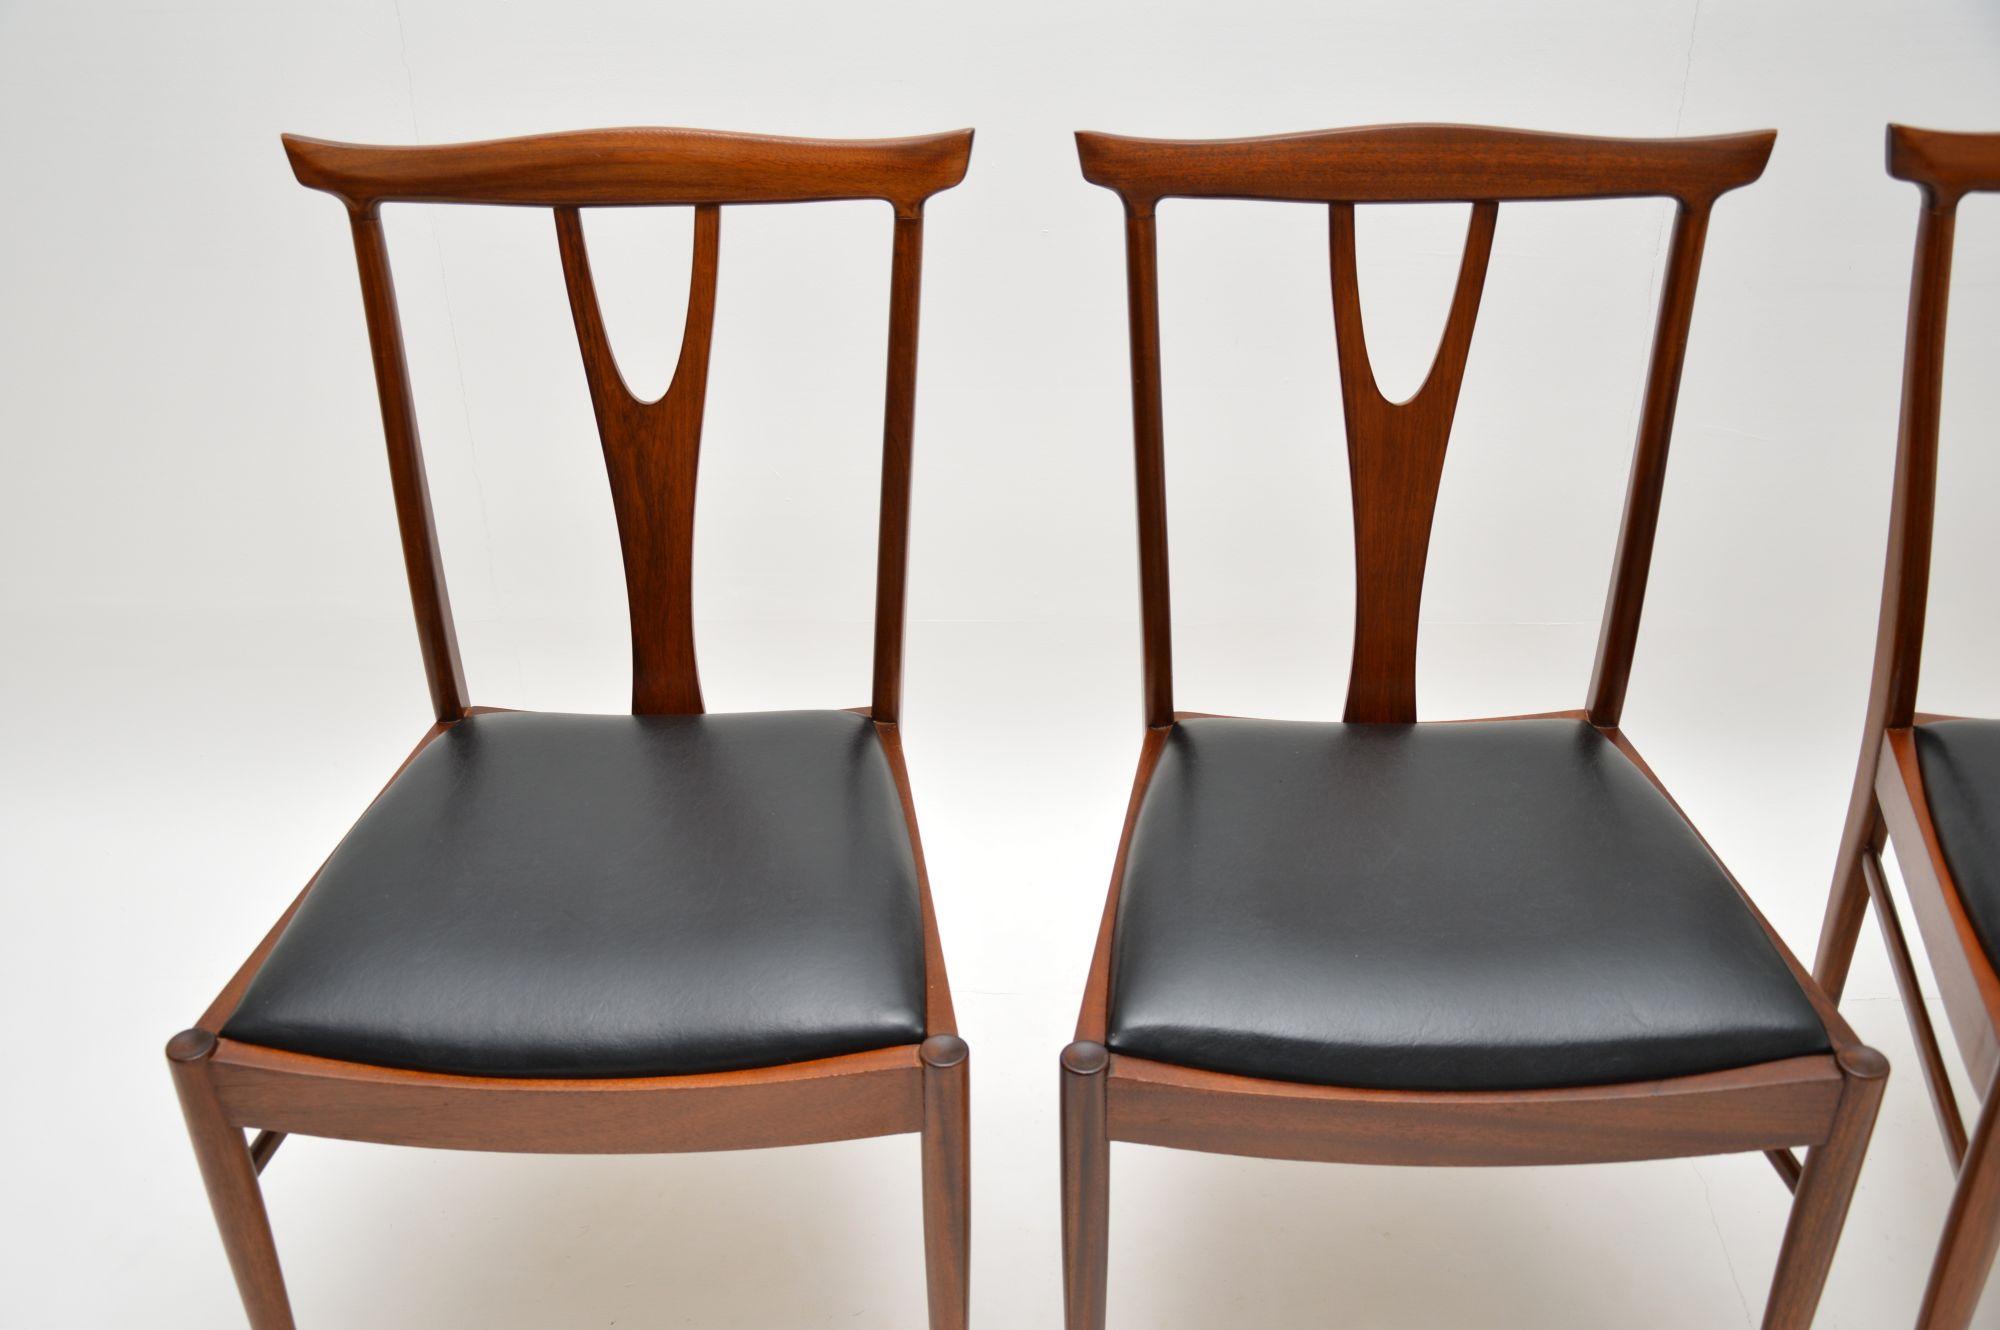 British Set of 4 Vintage Dining Chairs in Afromosia